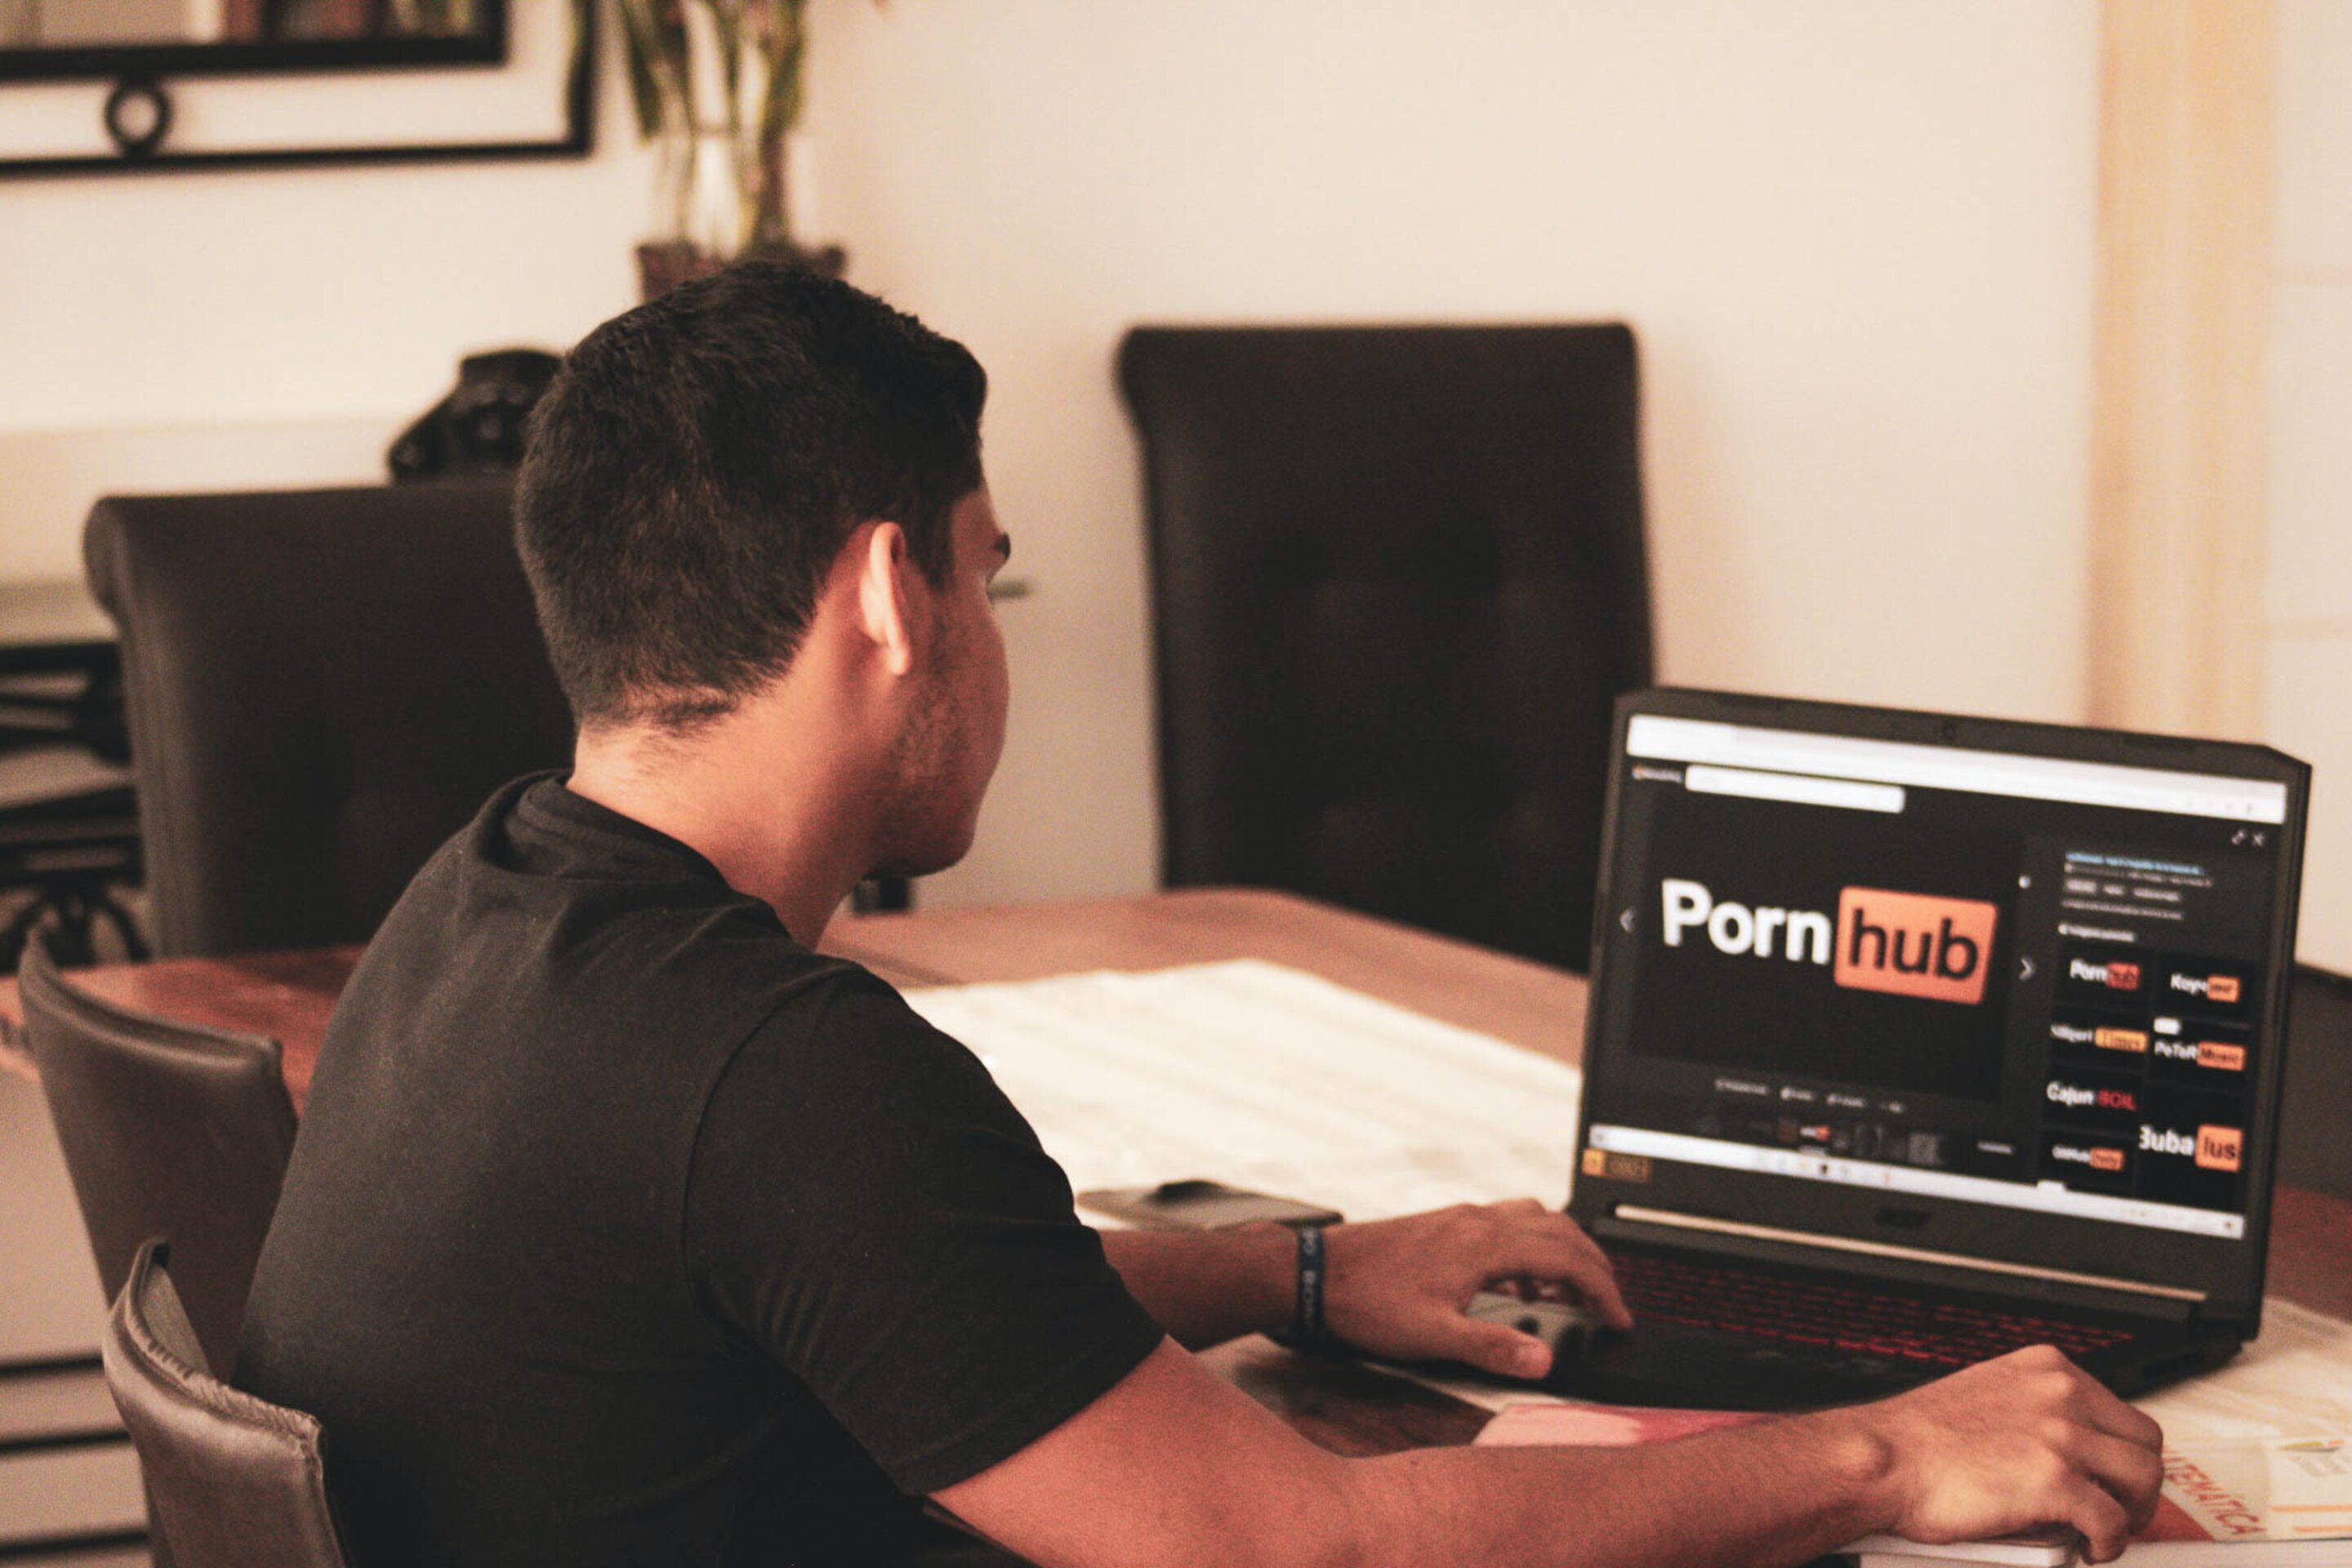 #Pornhub parent bought by Canadian private equity firm